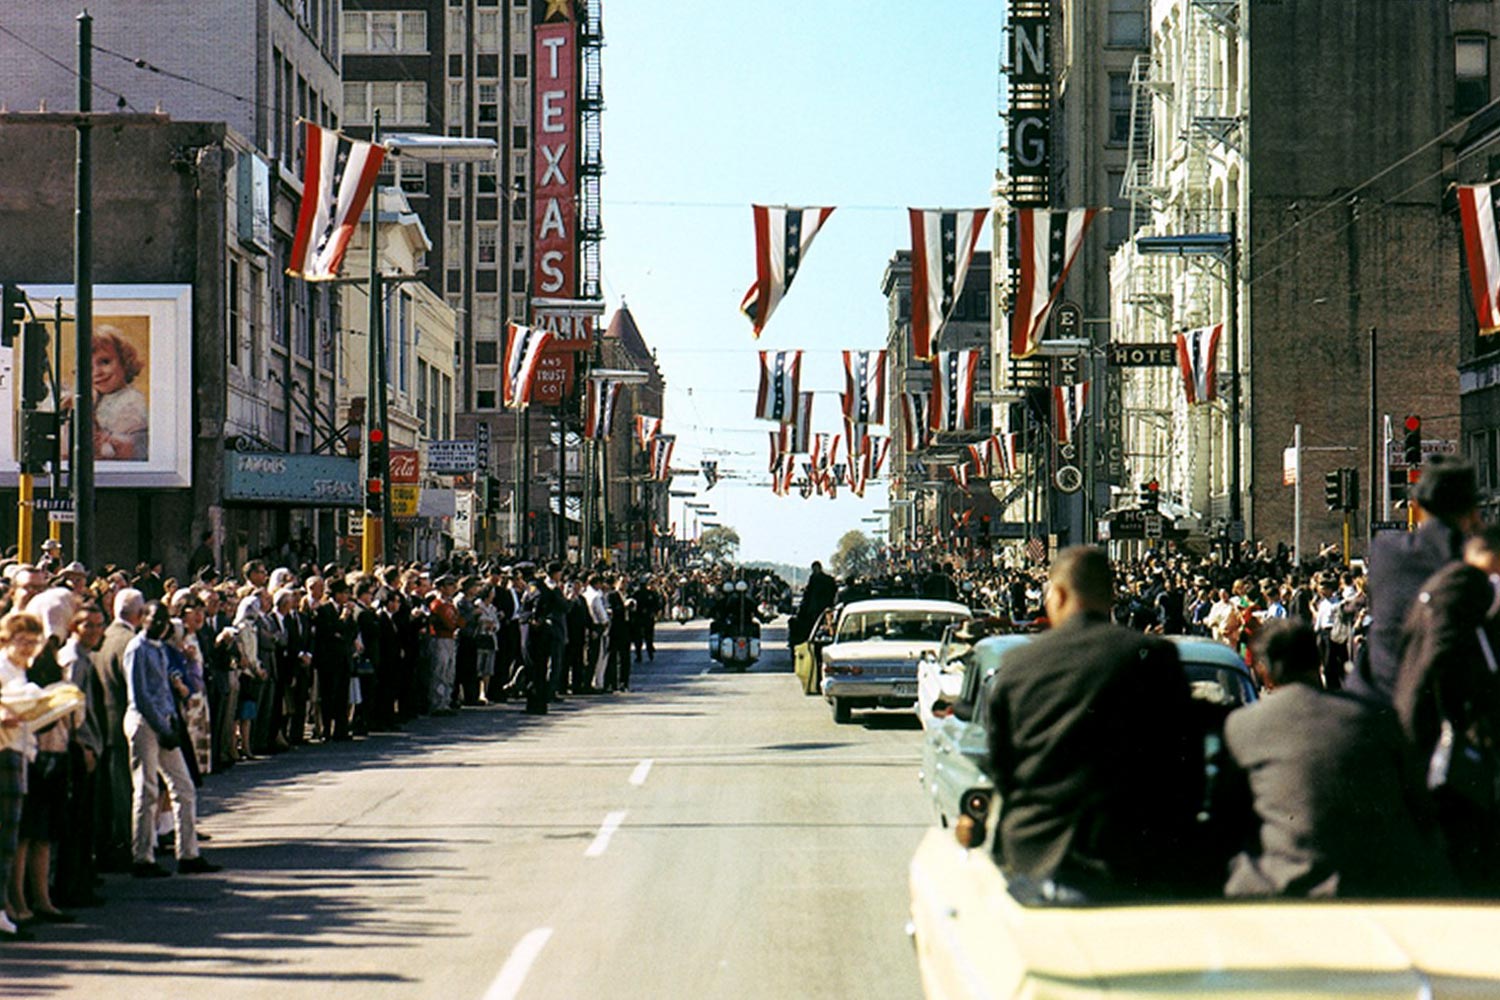 Streets lined with people waiting to get a glimpse of John F. Kennedy